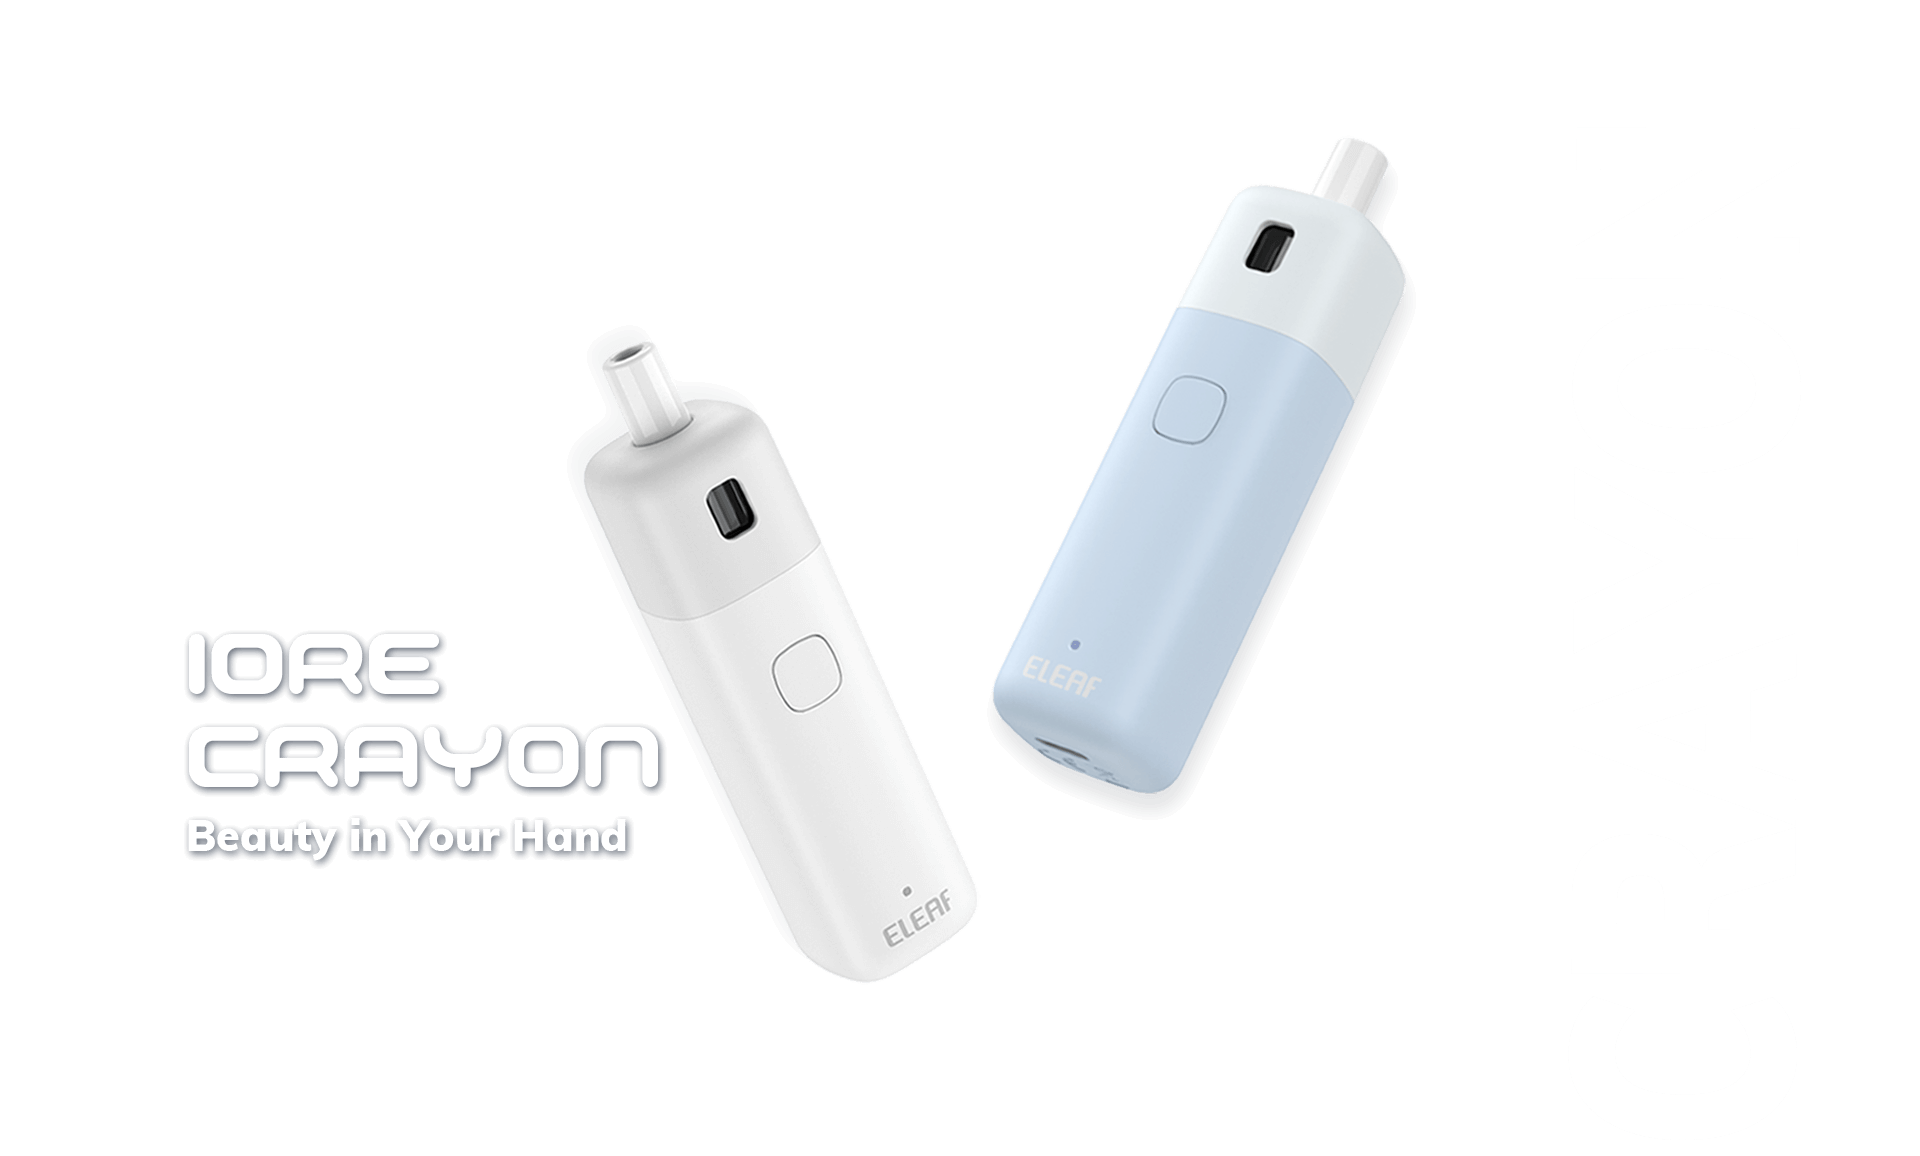 Eleaf IORE CRAYON, one of the best refillable pod vape kits